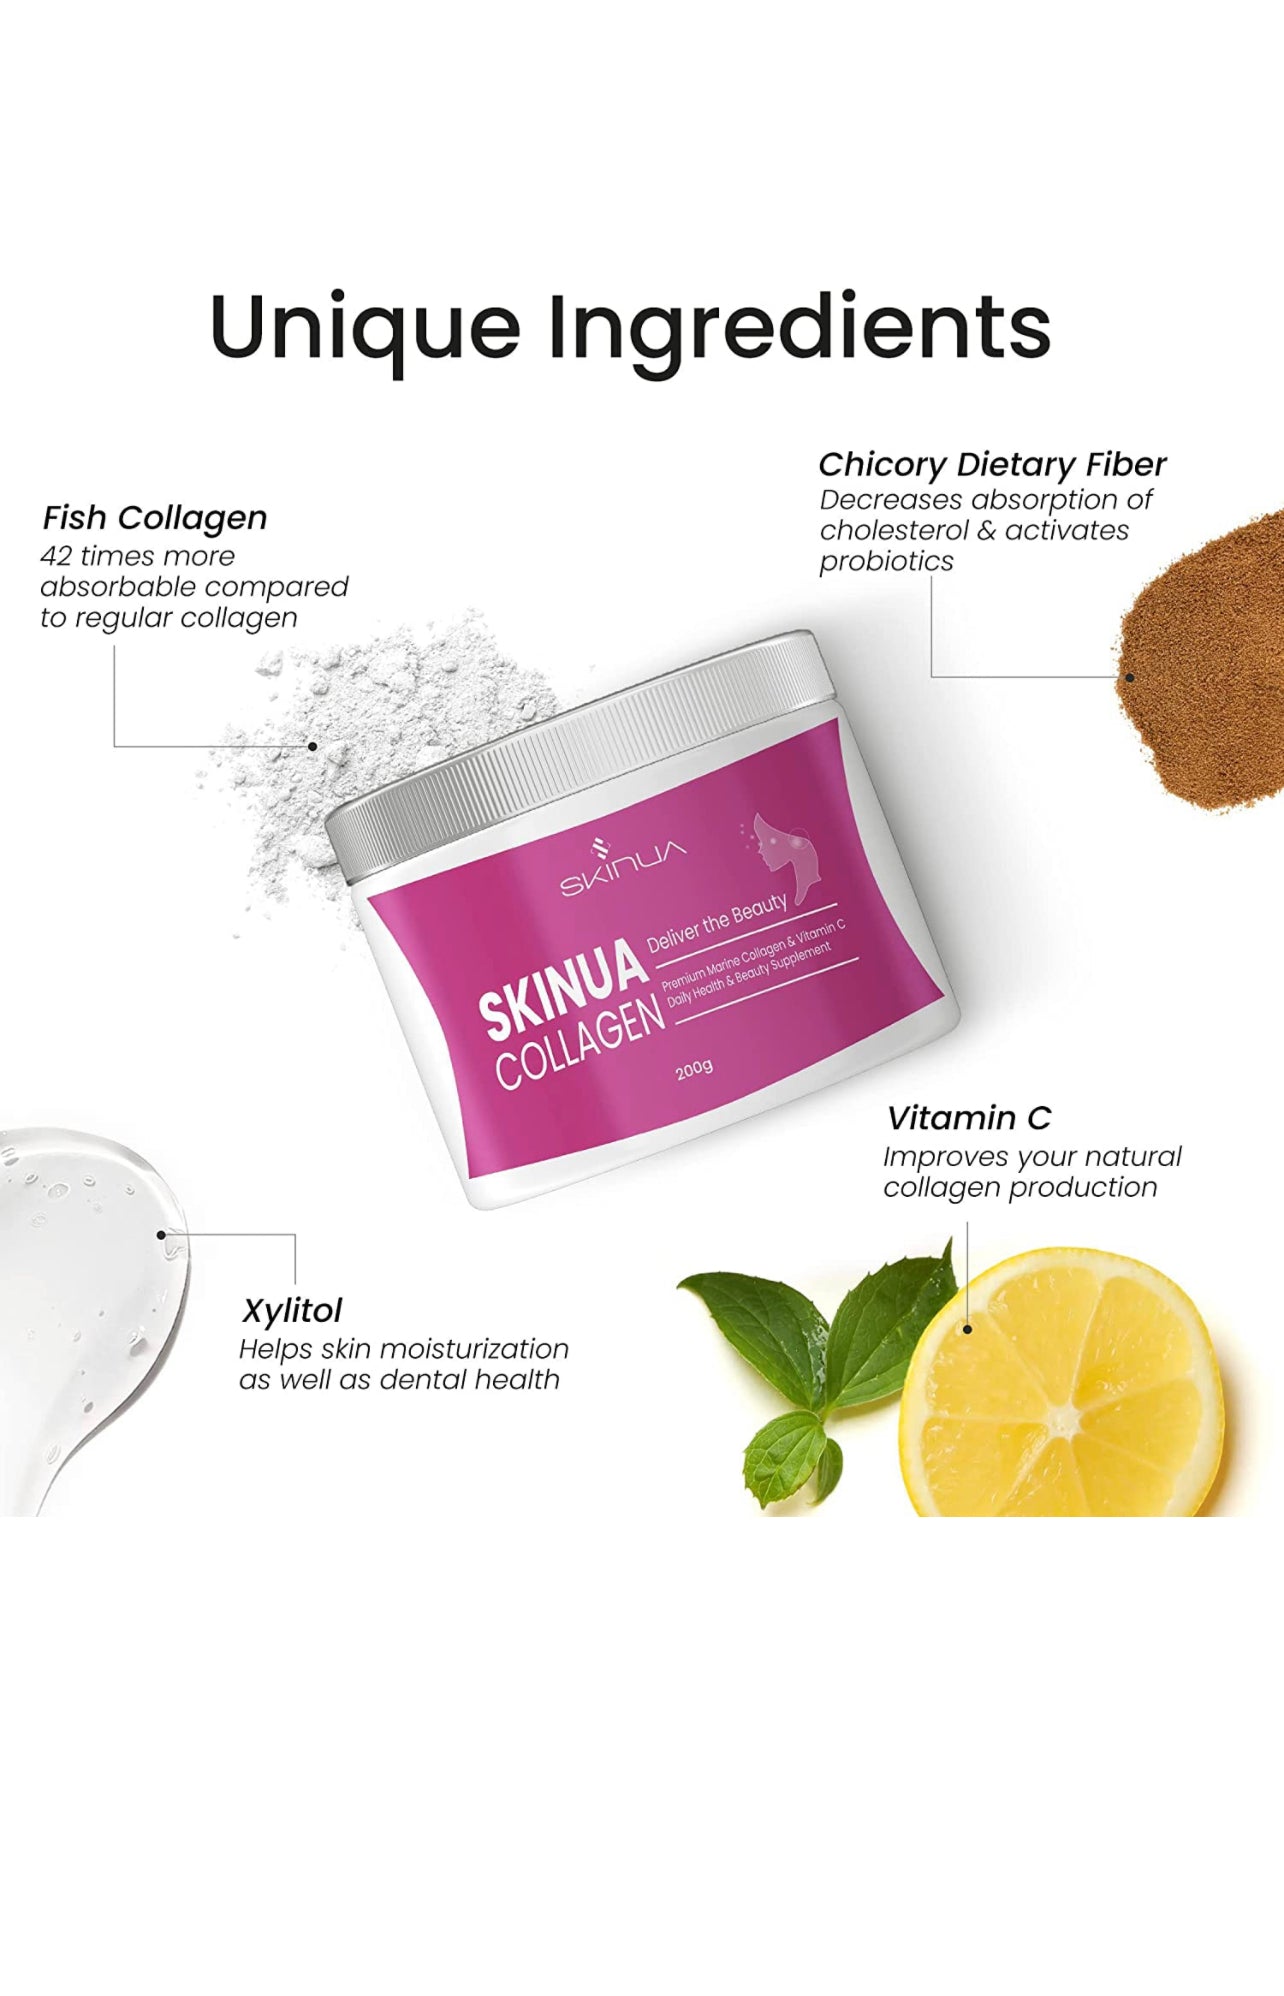 Skinua Collagen Facts